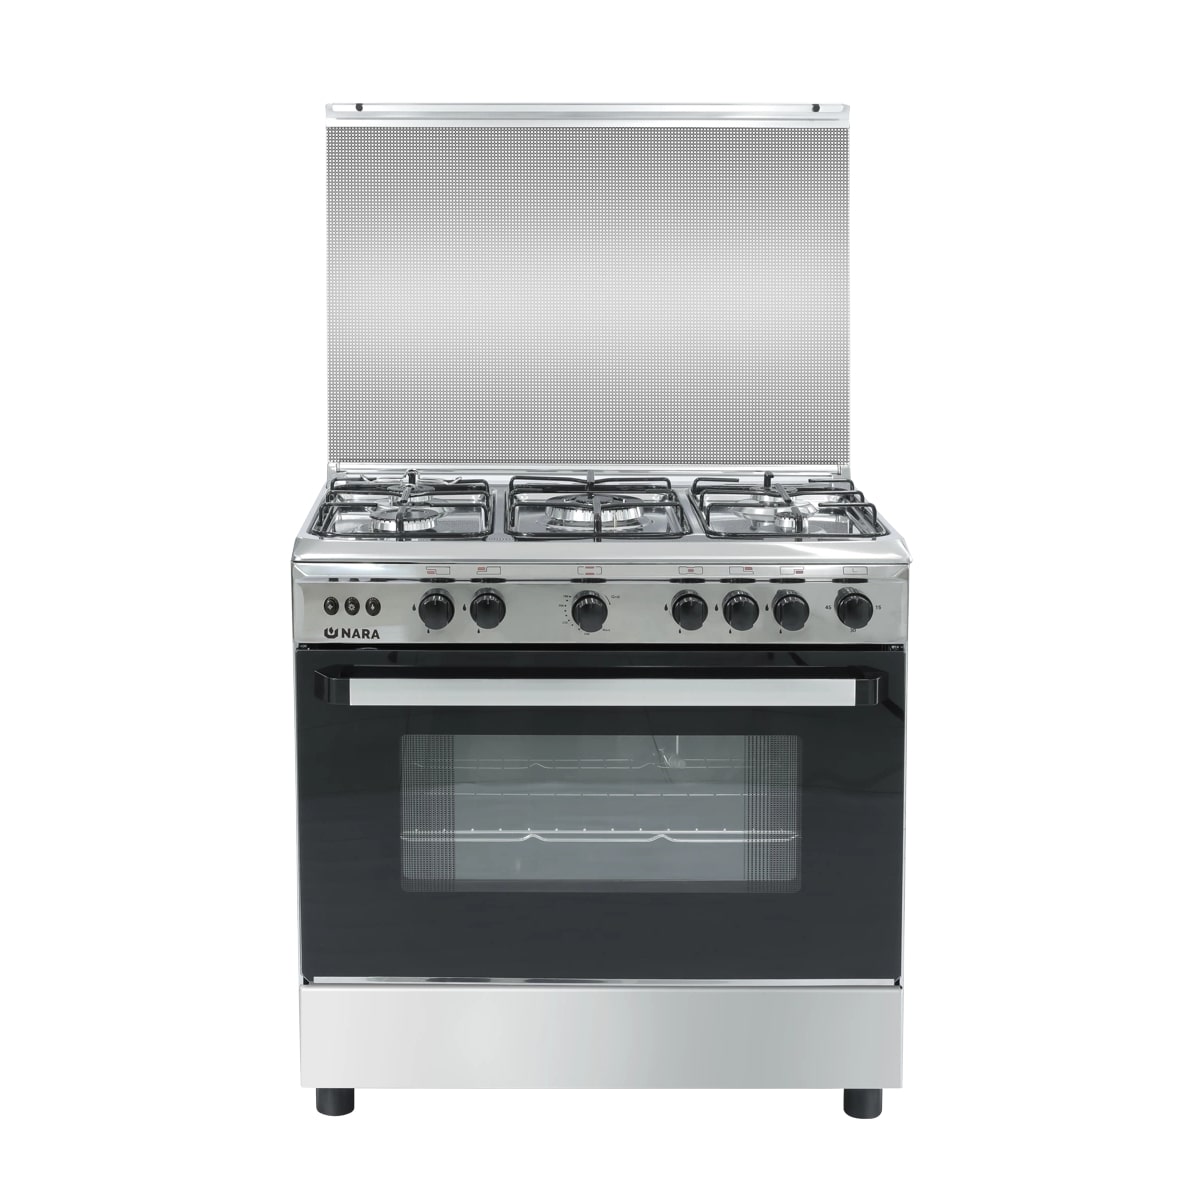 Nara Gas Cooker, 80 cm, Full Safety System, Double Glass, Glack Glossy Stainless Steel